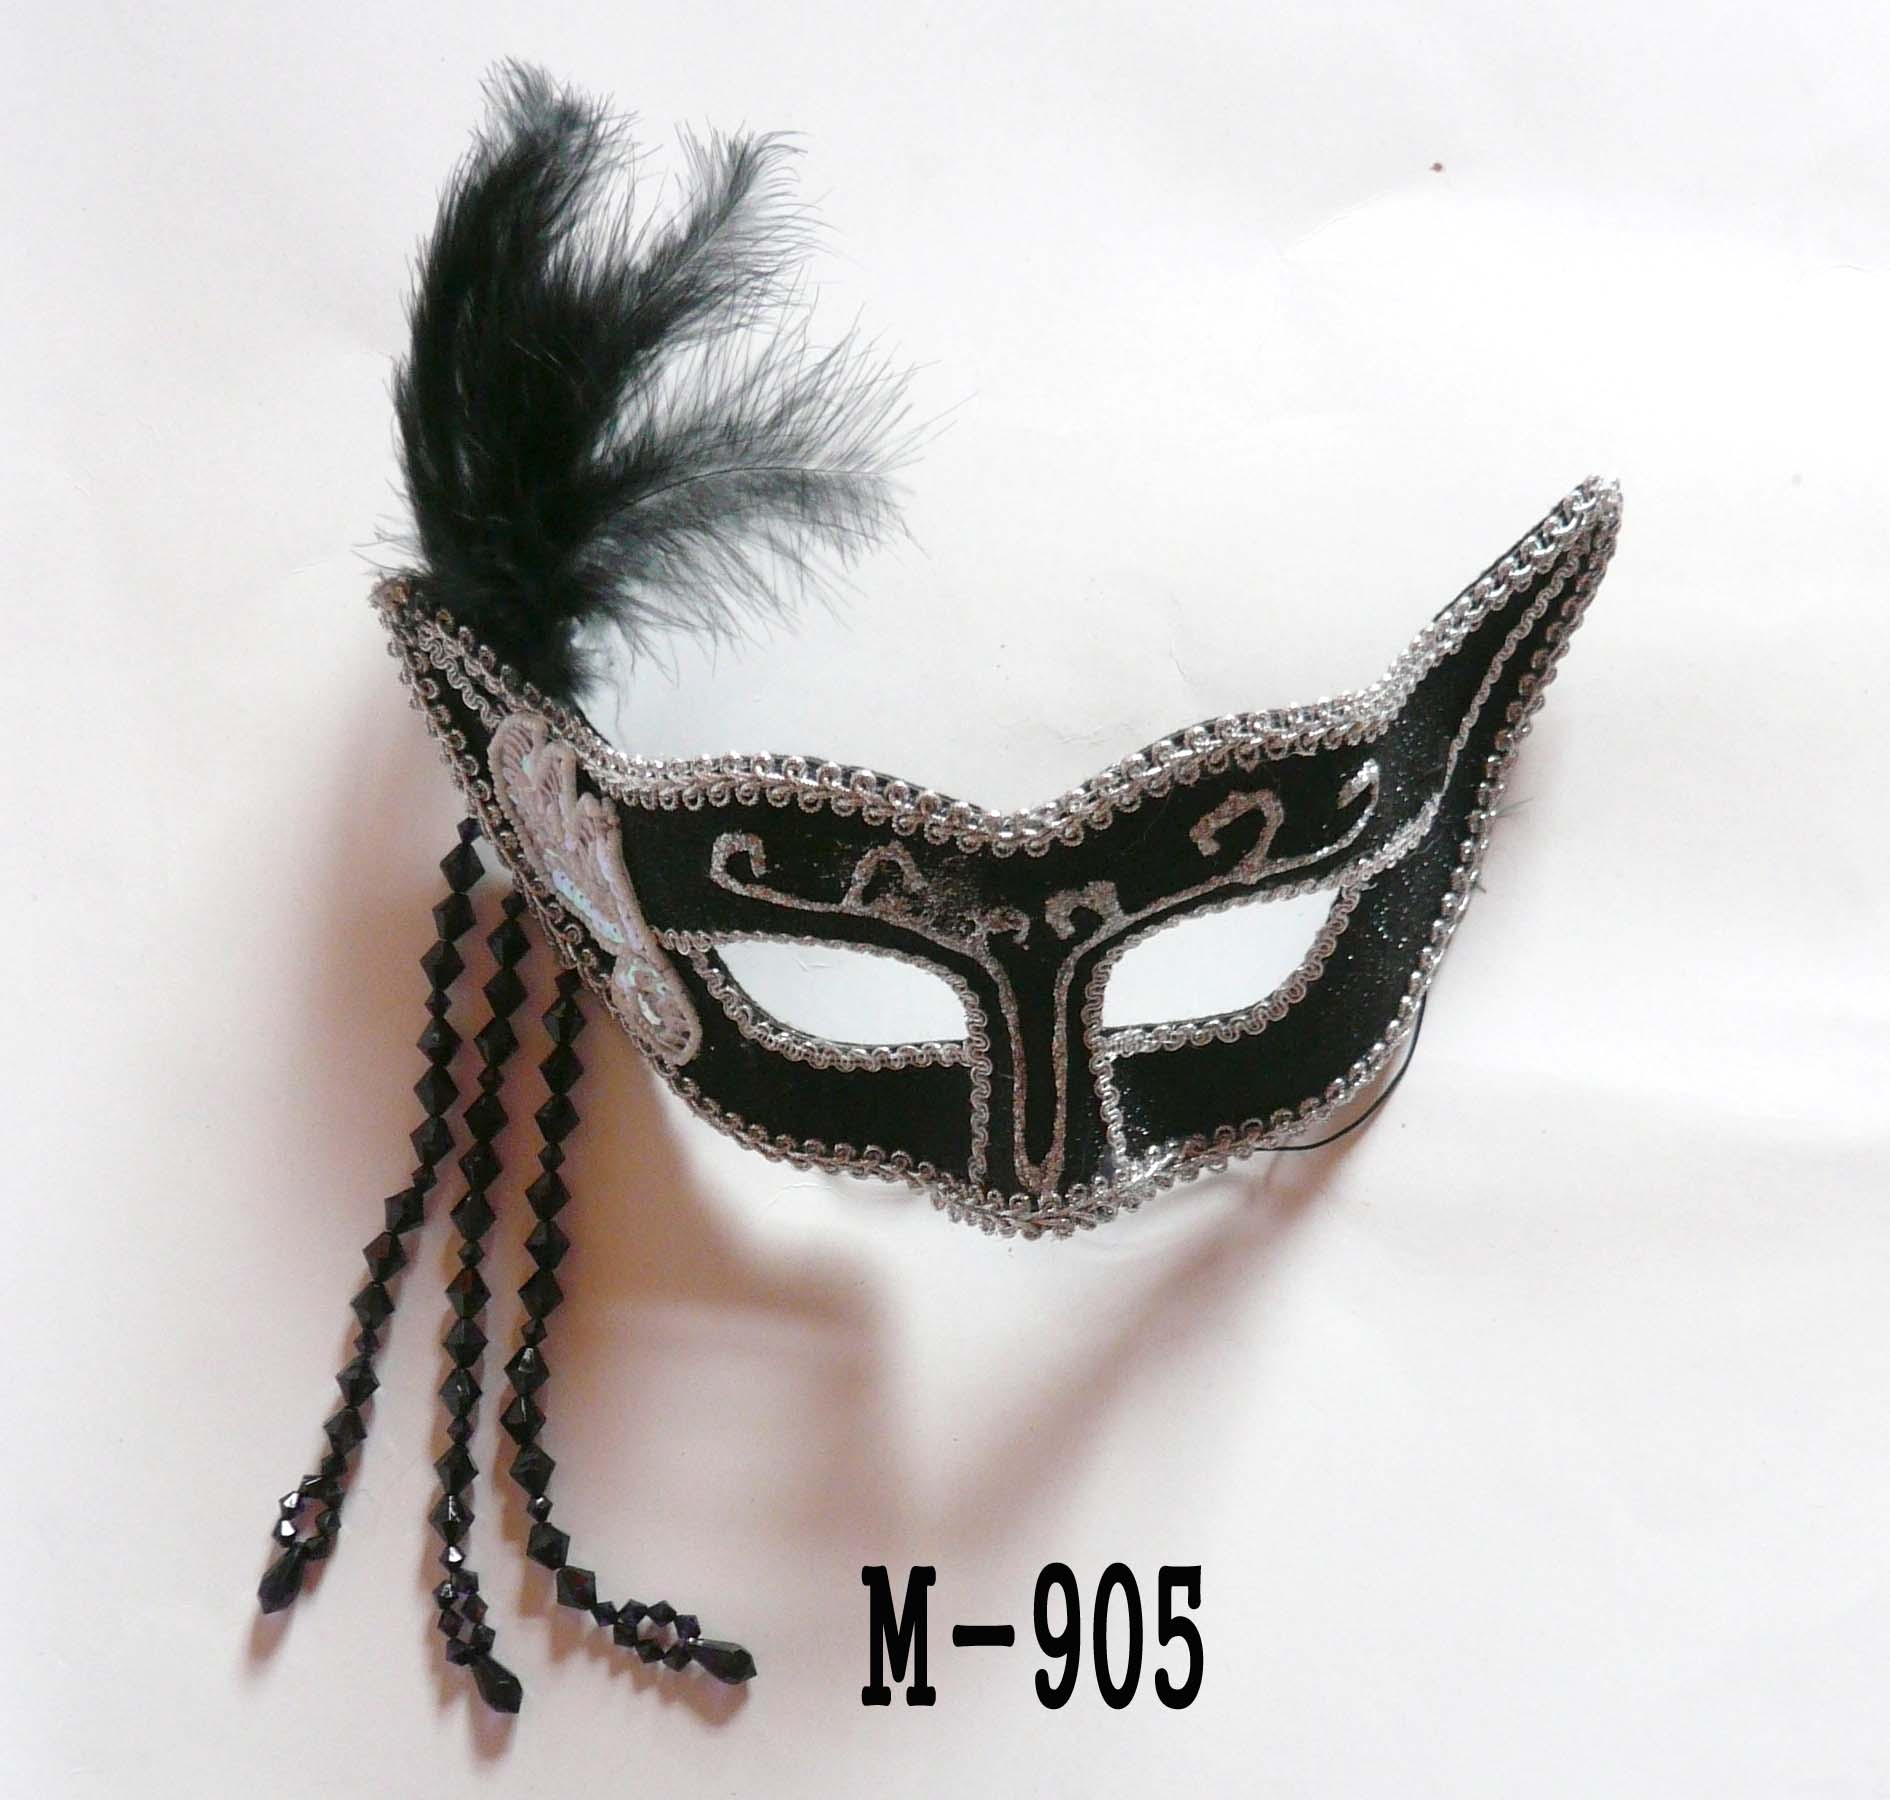 Cheap feather masks for sale - Made in China M-905